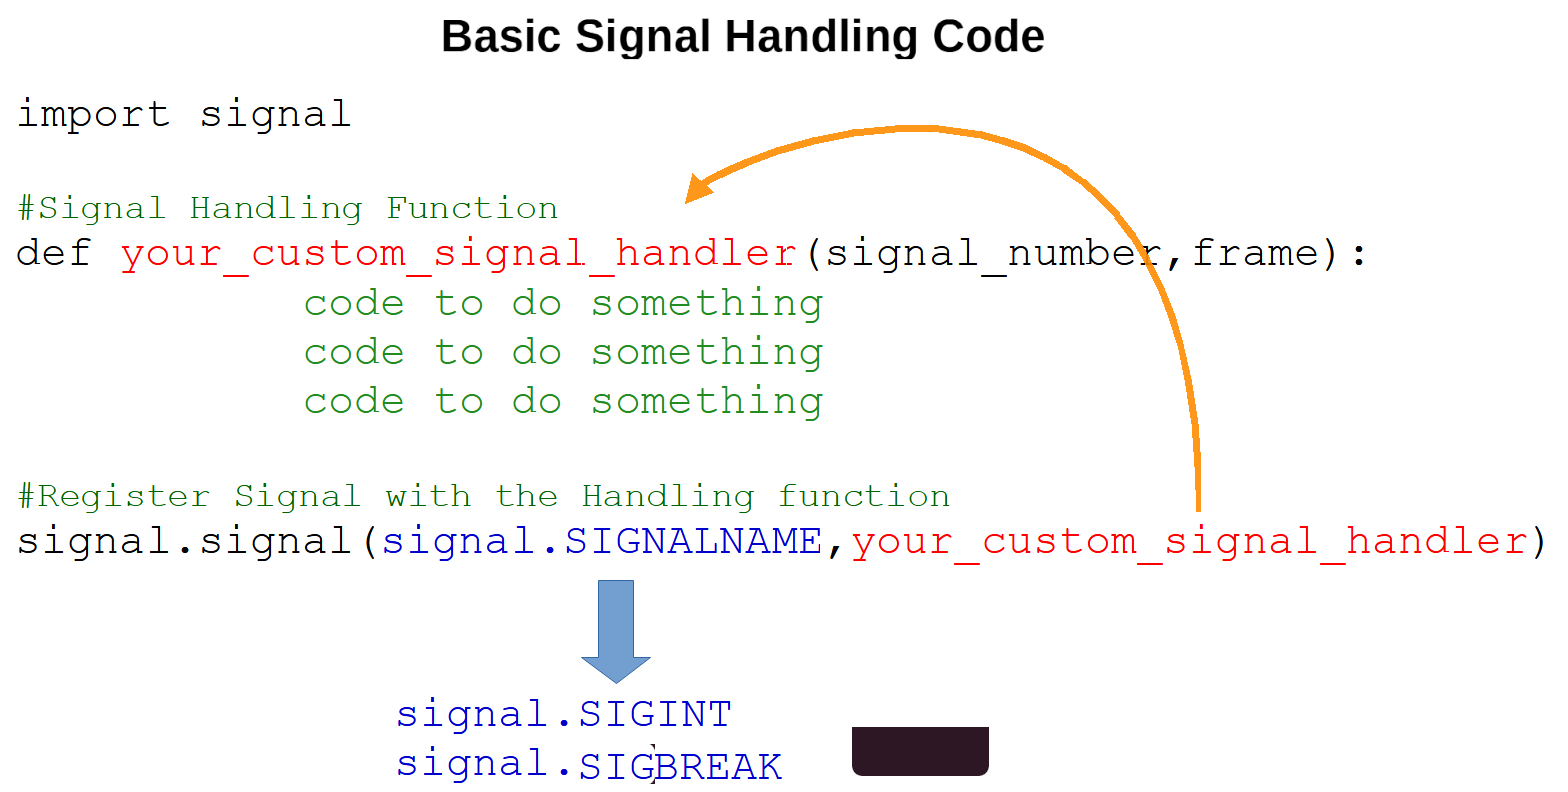 how to configure a signal handler for SIGINT (CTRL+C) or SIGBREAK signal using python signal module in windows and linux